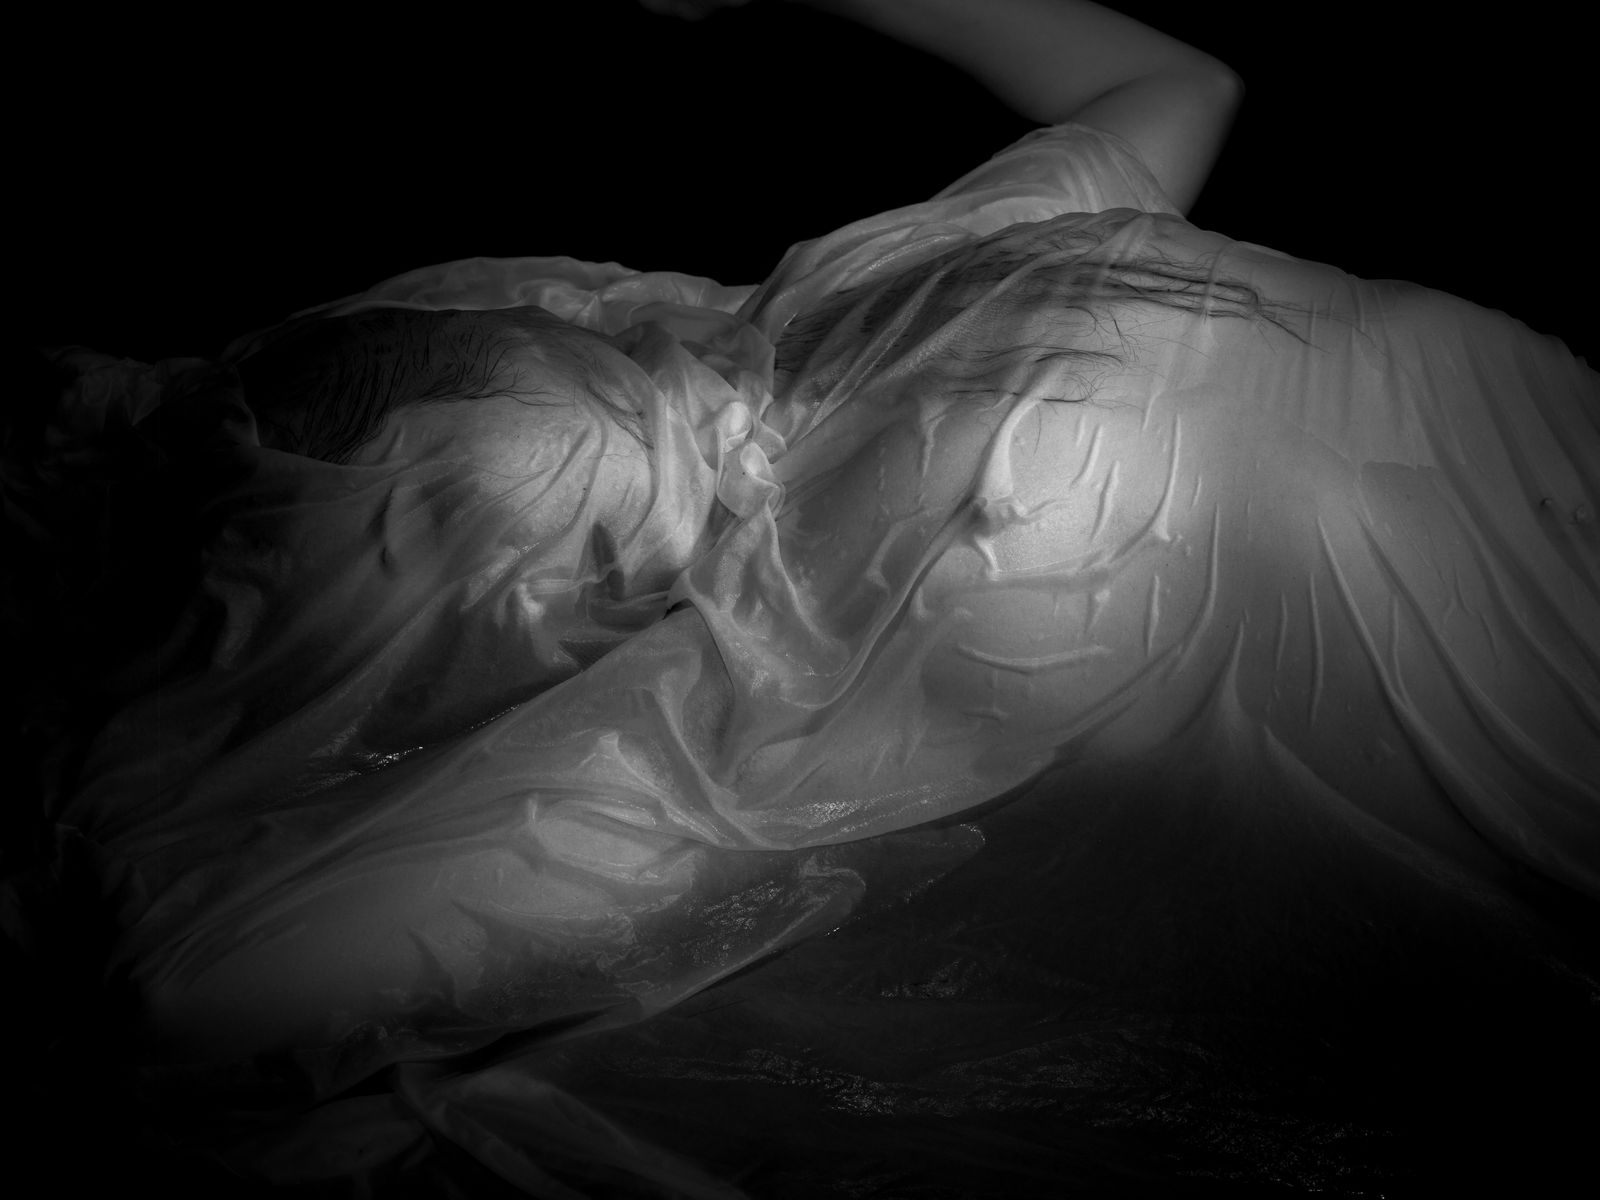 © Jay Keim - Image from the Wet Silk photography project